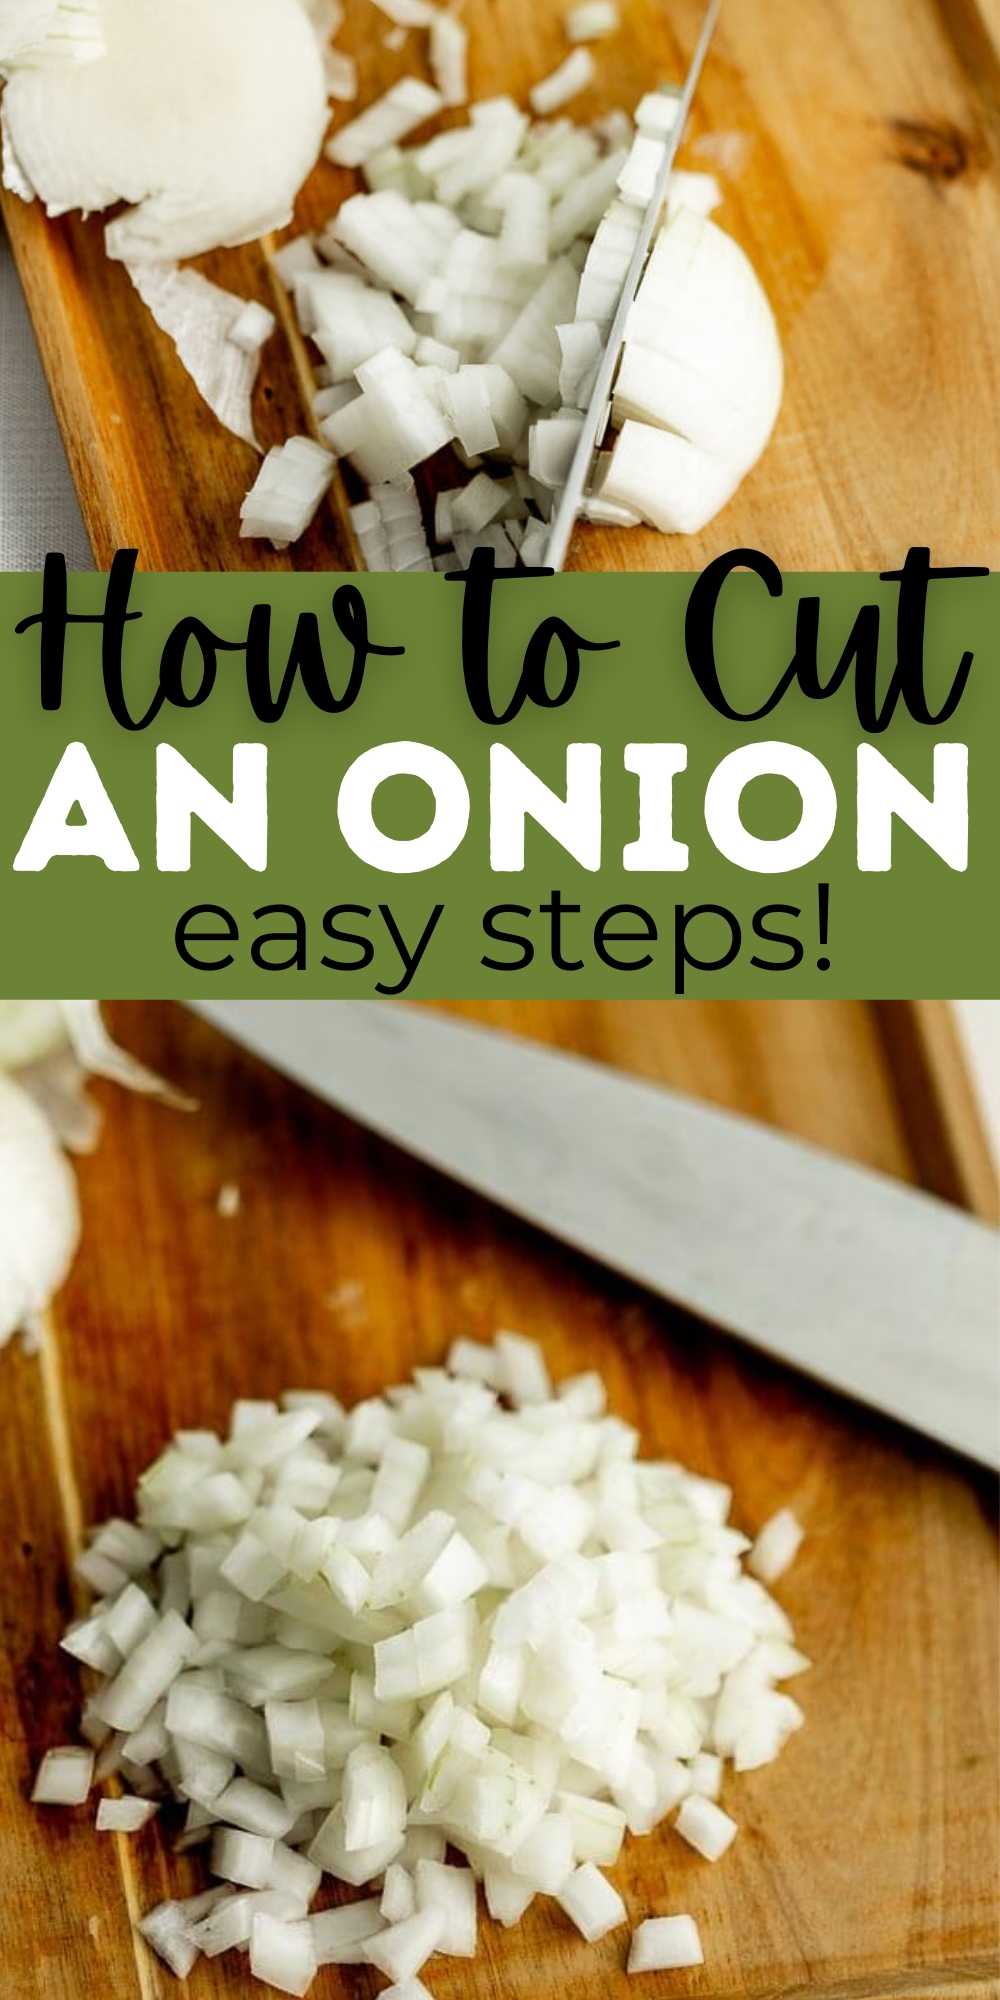 How to Cut Green Onions - Eating on a Dime